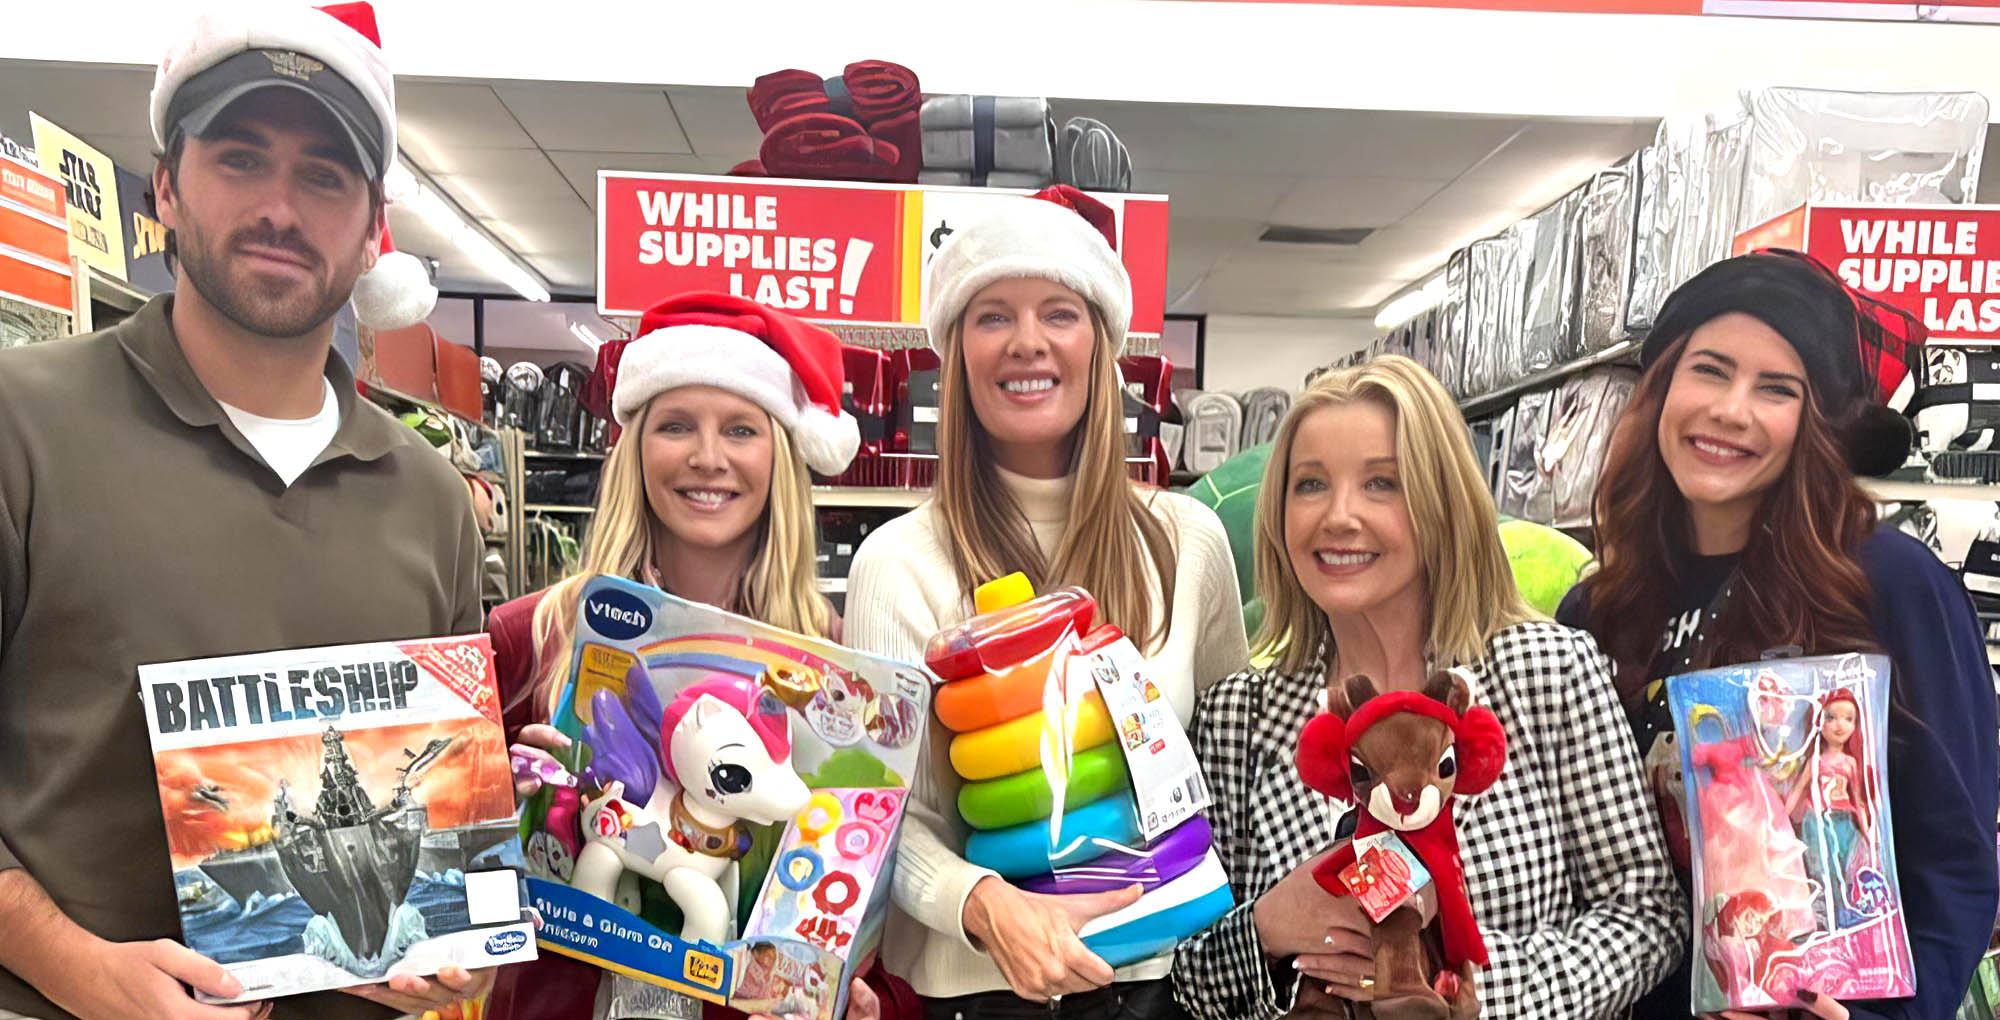 conner floyd, lauralee bell, michelle stafford, melody thomas scott, and courtney hope at big lots buying toys.